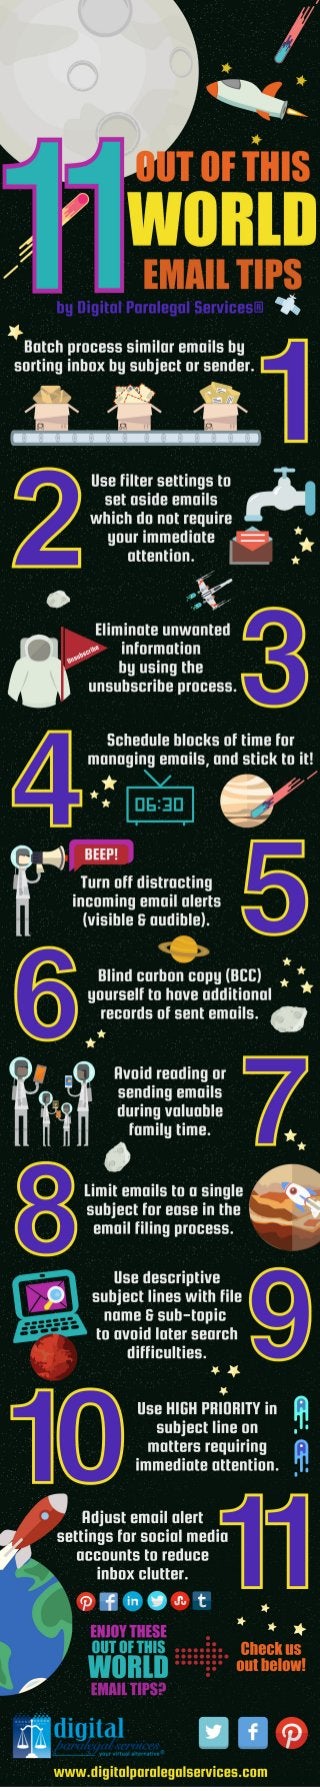 11 Out of this World Email Tips